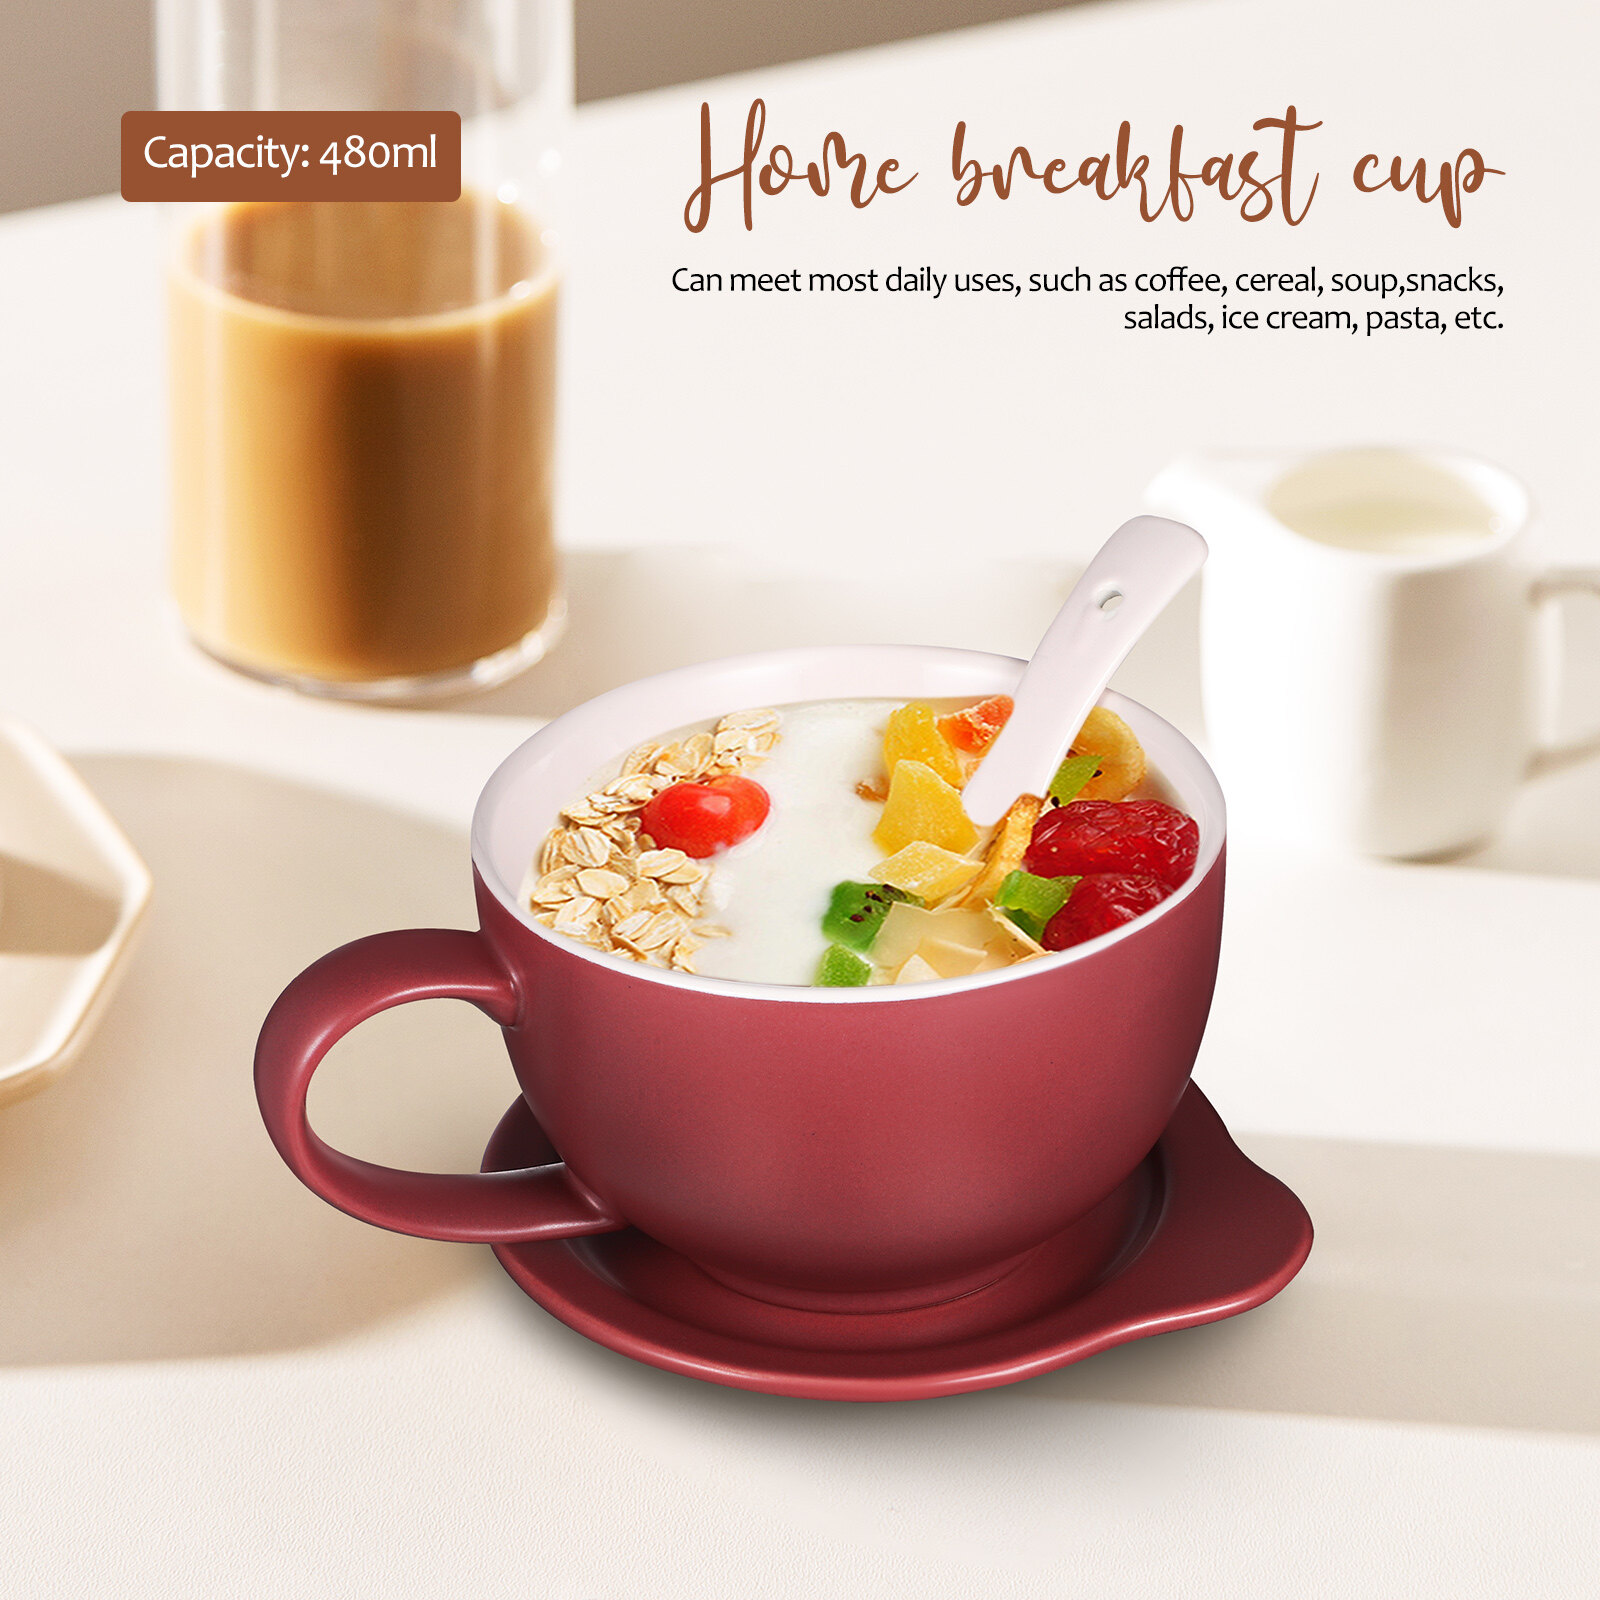 Ceramic Mug Set 480ml Large Capacity Coffee Mug Breakfast Cup with Lid and Spoon for Milk Cereal Oatmeal - image 4 of 8